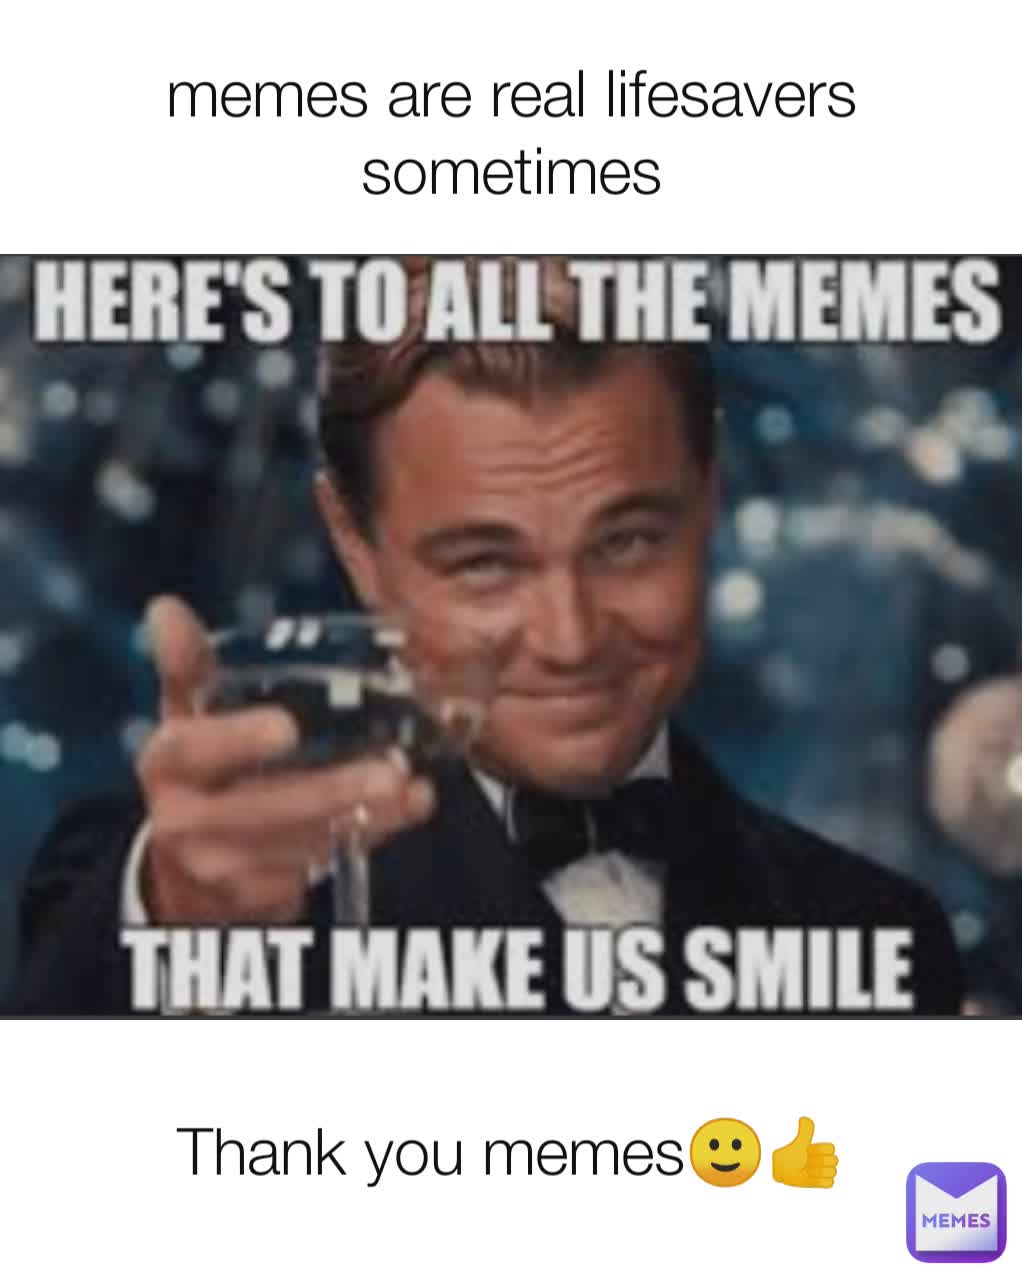 memes are real lifesavers sometimes Thank you memes🙂👍